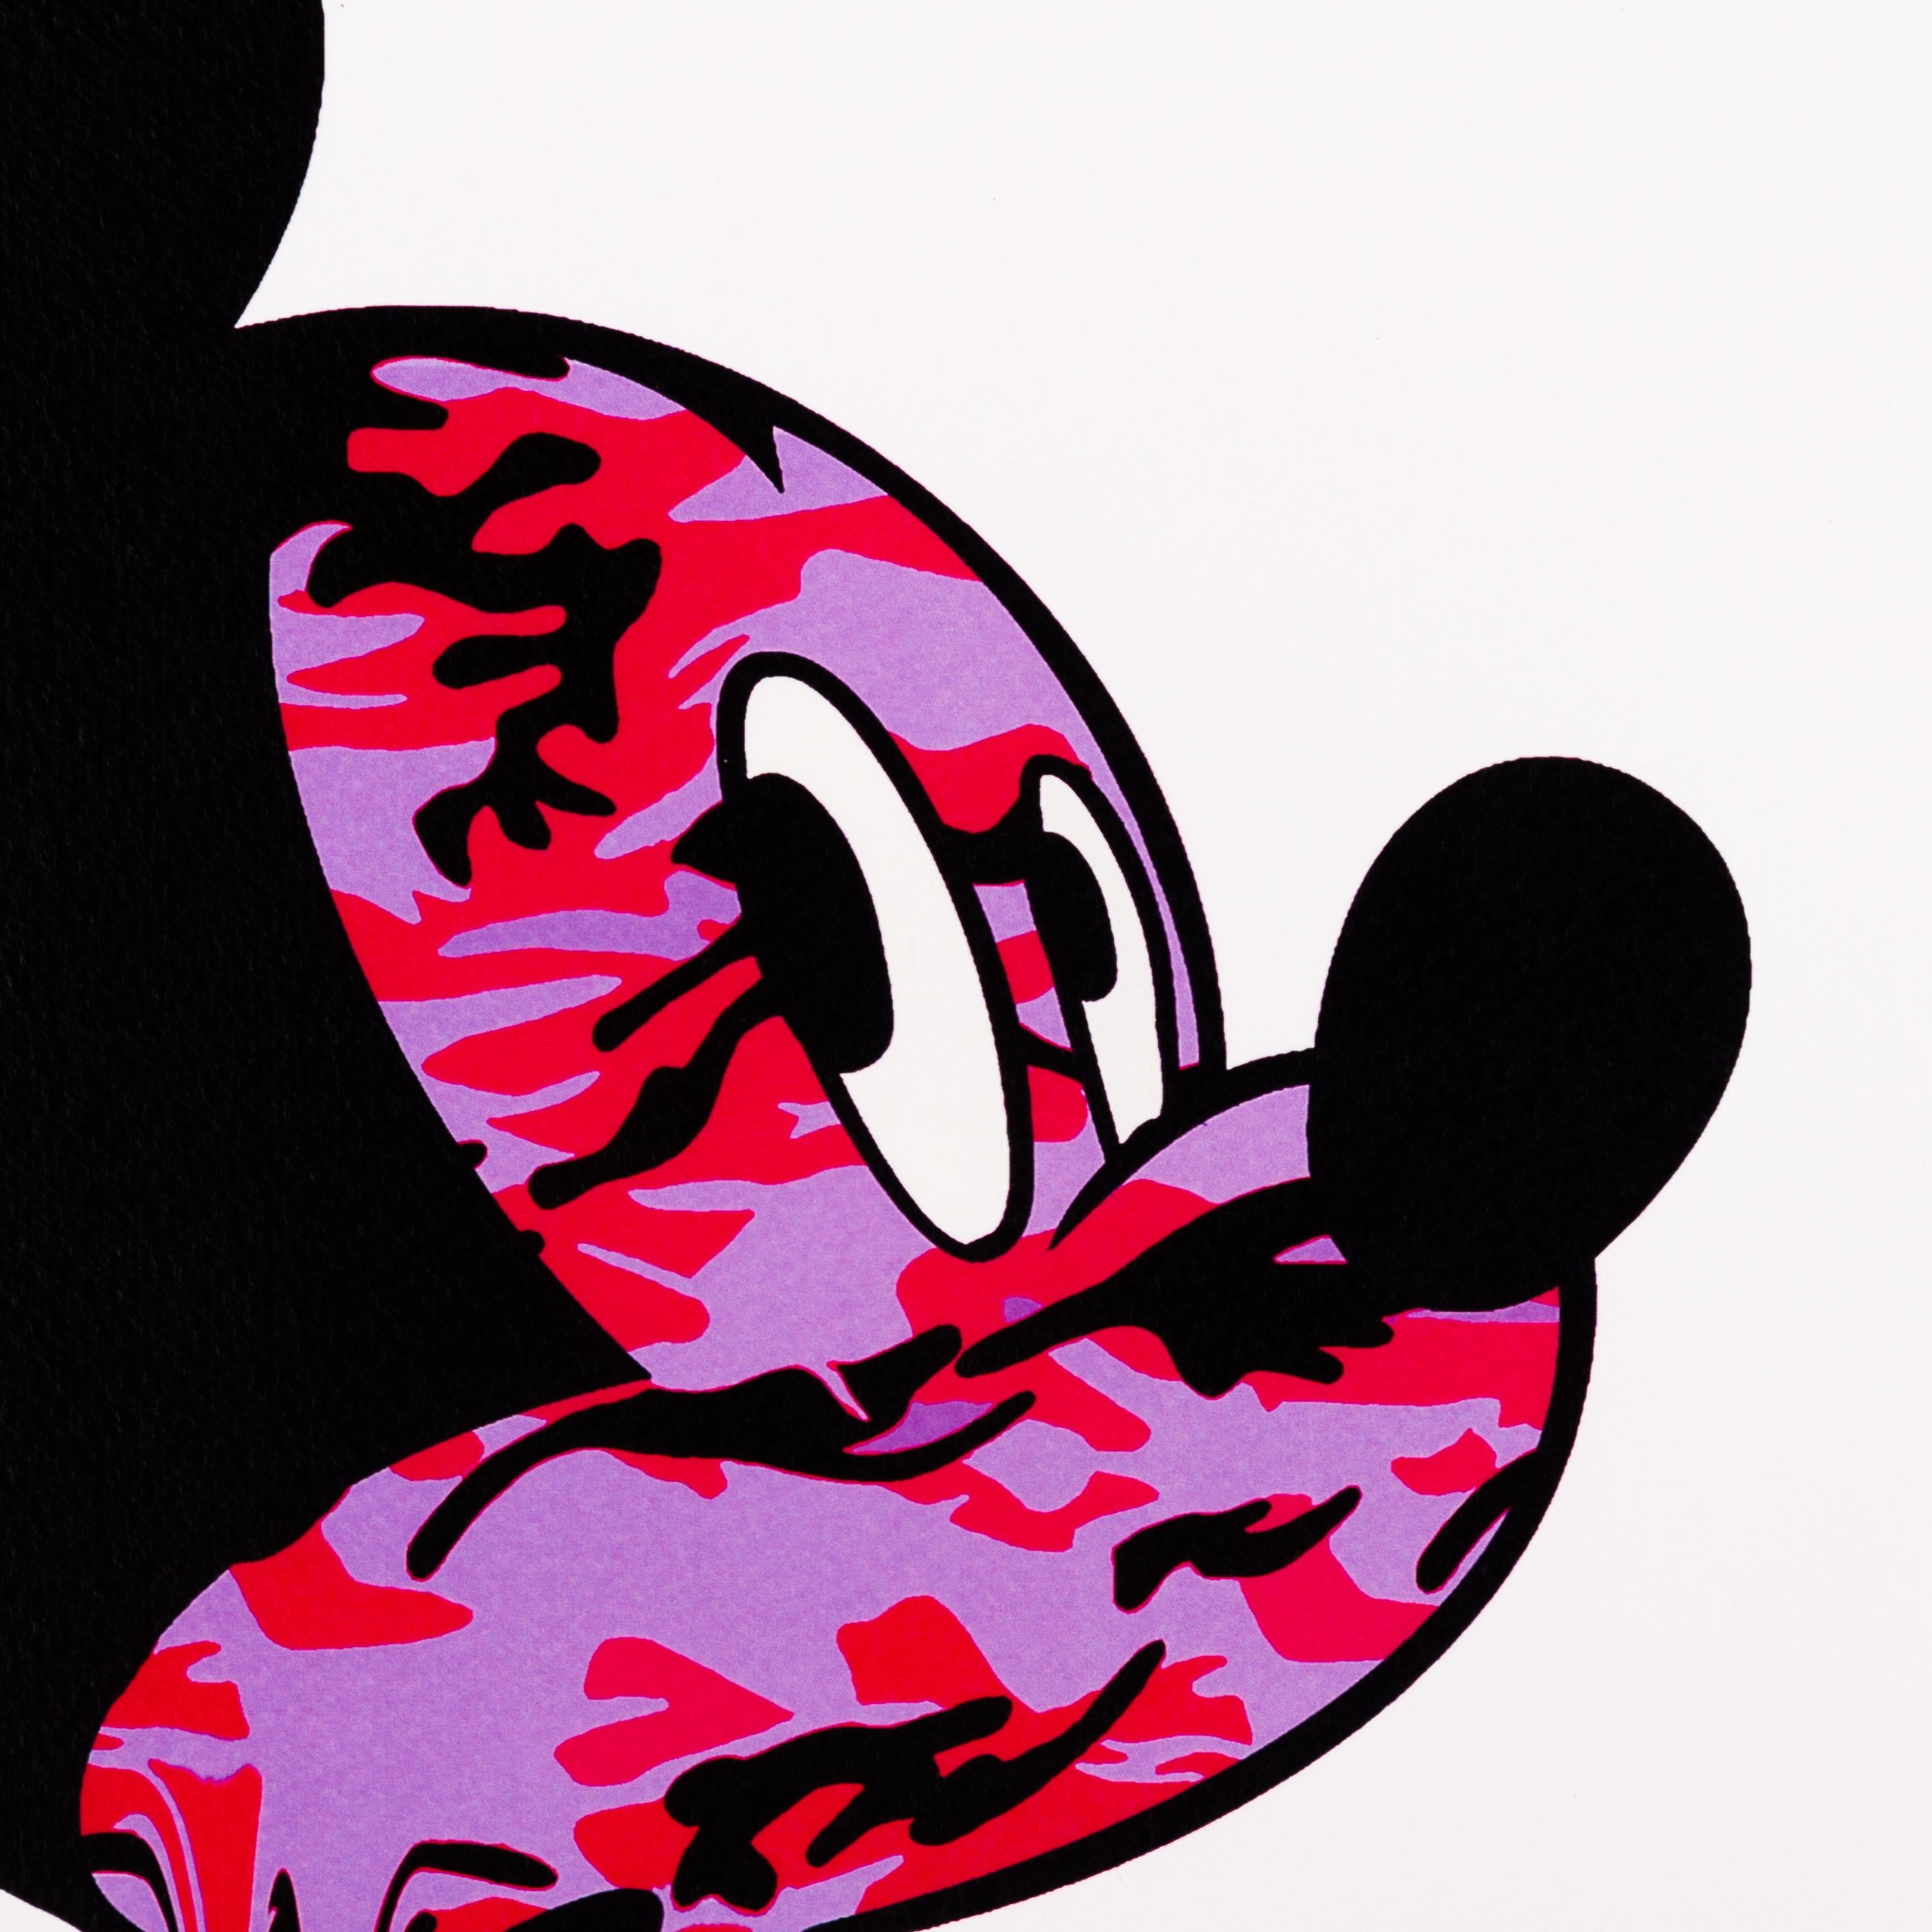 Death NYC Signed Limited Ed Pop Art Print Mickey Mouse
From a private English collection
Free international shipping

